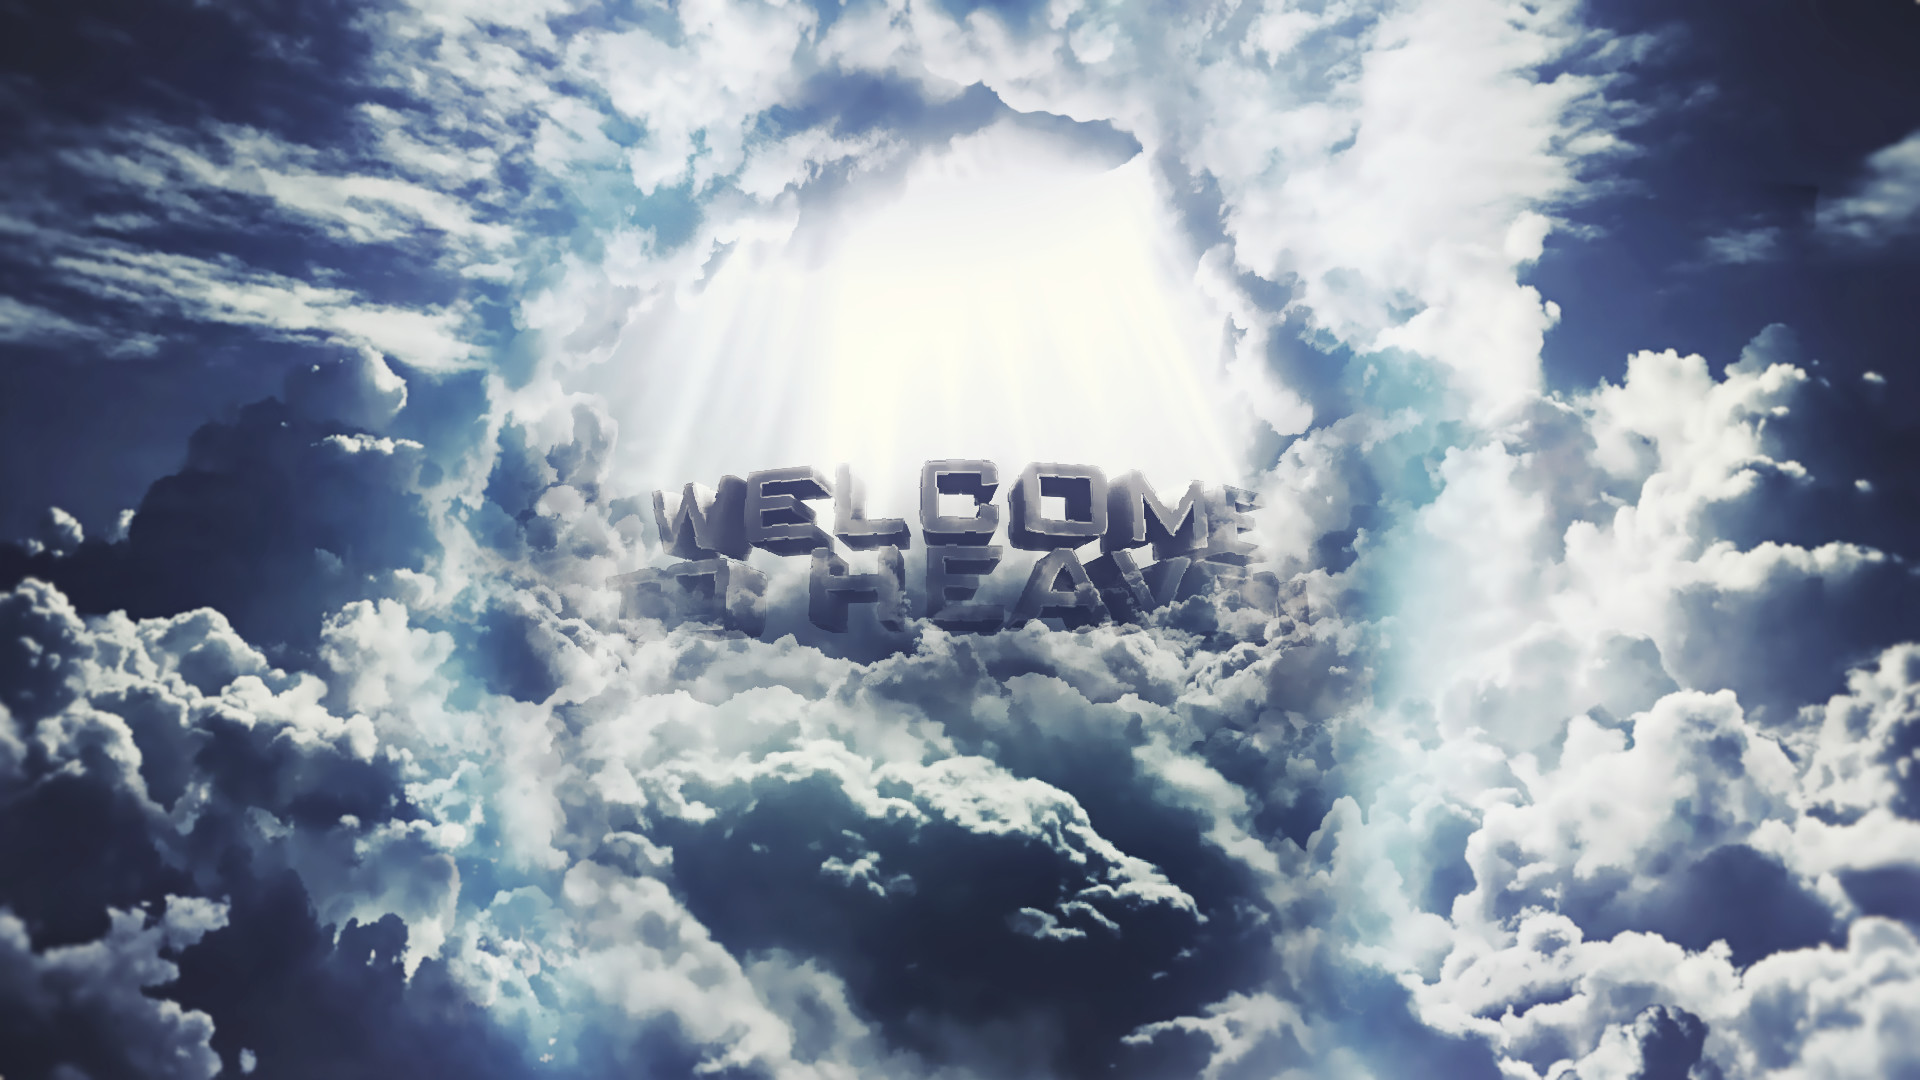 1920x1080 Welcome to heaven wallpaper by ZeraCreations Welcome to heaven wallpaper by  ZeraCreations